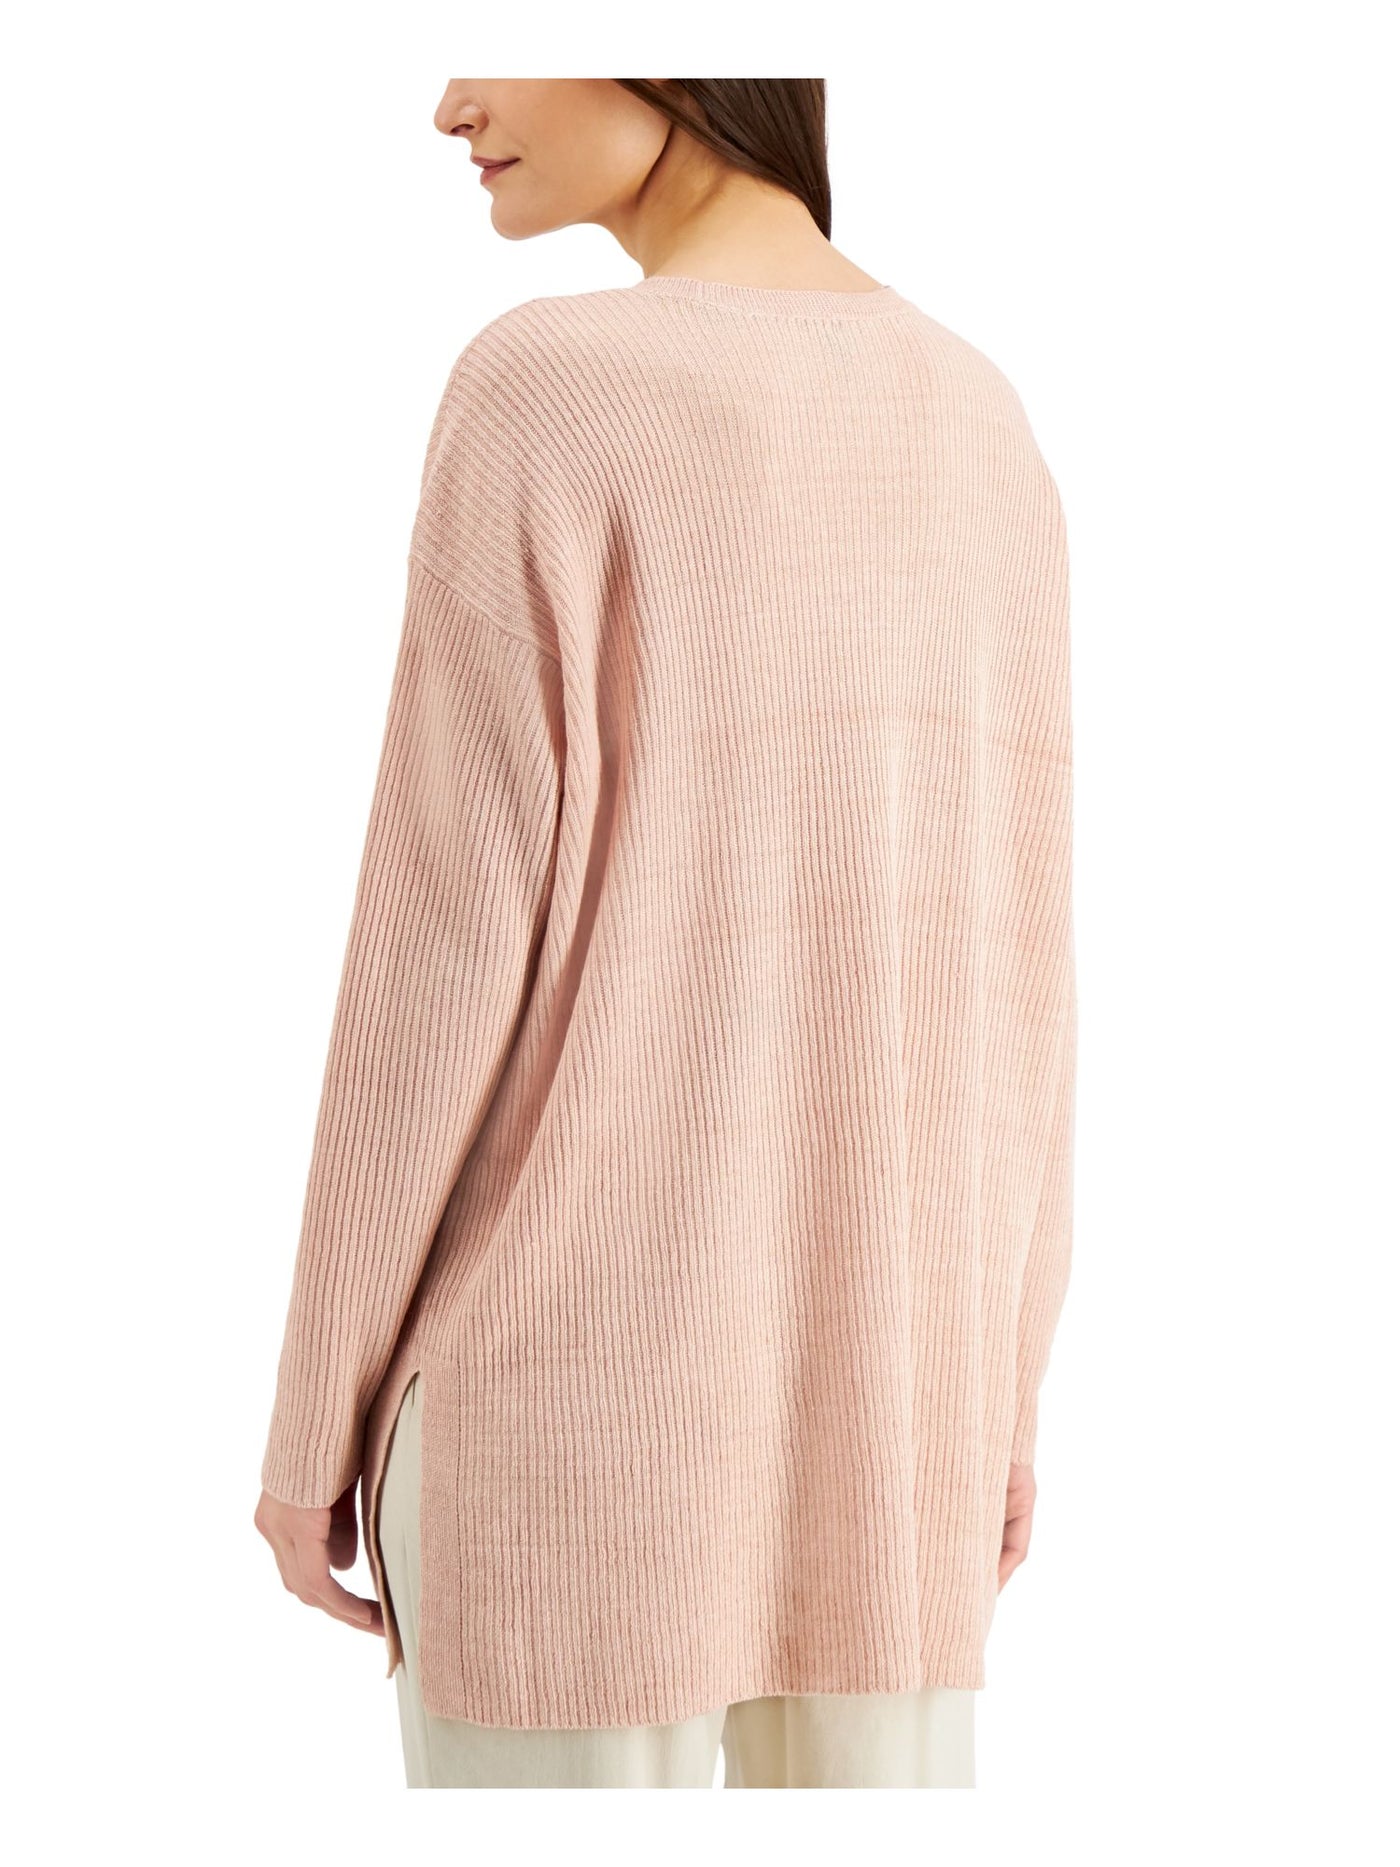 EILEEN FISHER Womens Pink Slitted Long Sleeve Round Neck Sweater M